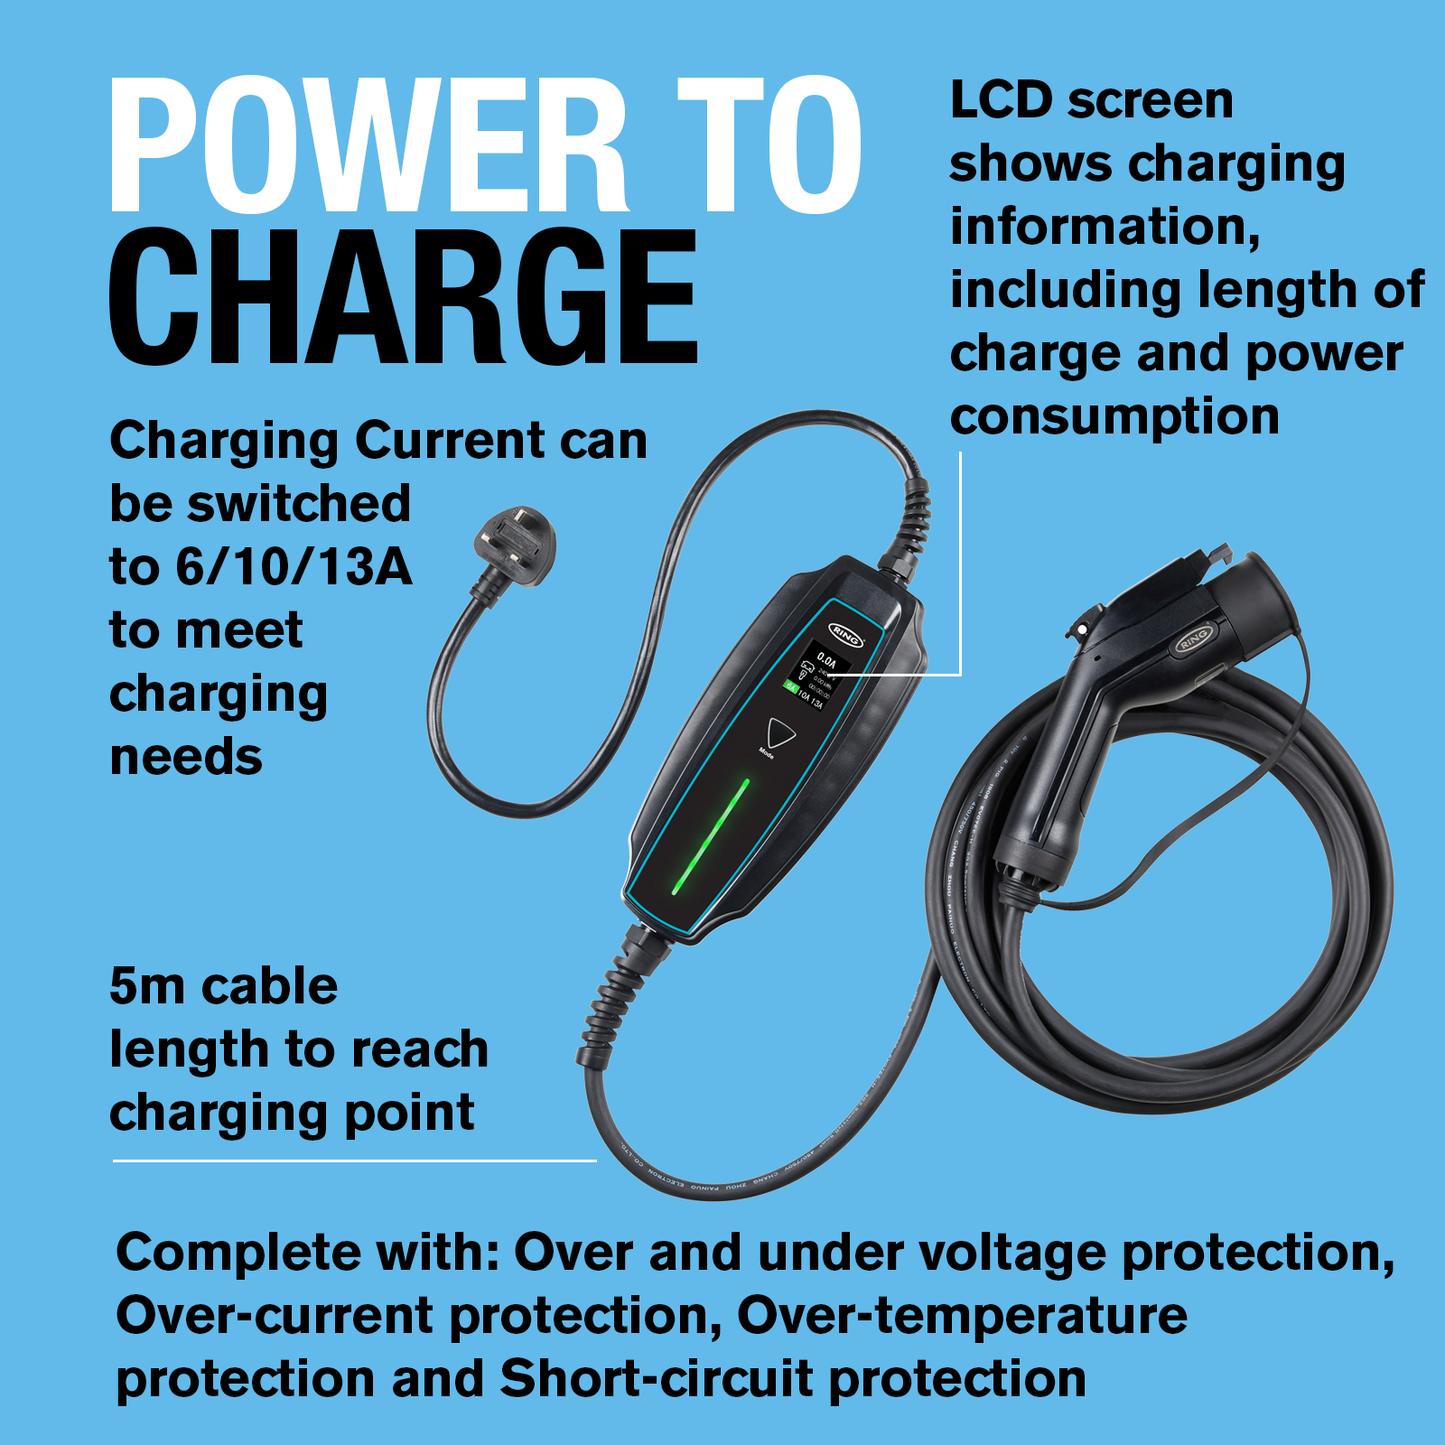 Ring RPC10A05 portable electric vehicle charging cable with a UK 3-pin to Type 1 connection